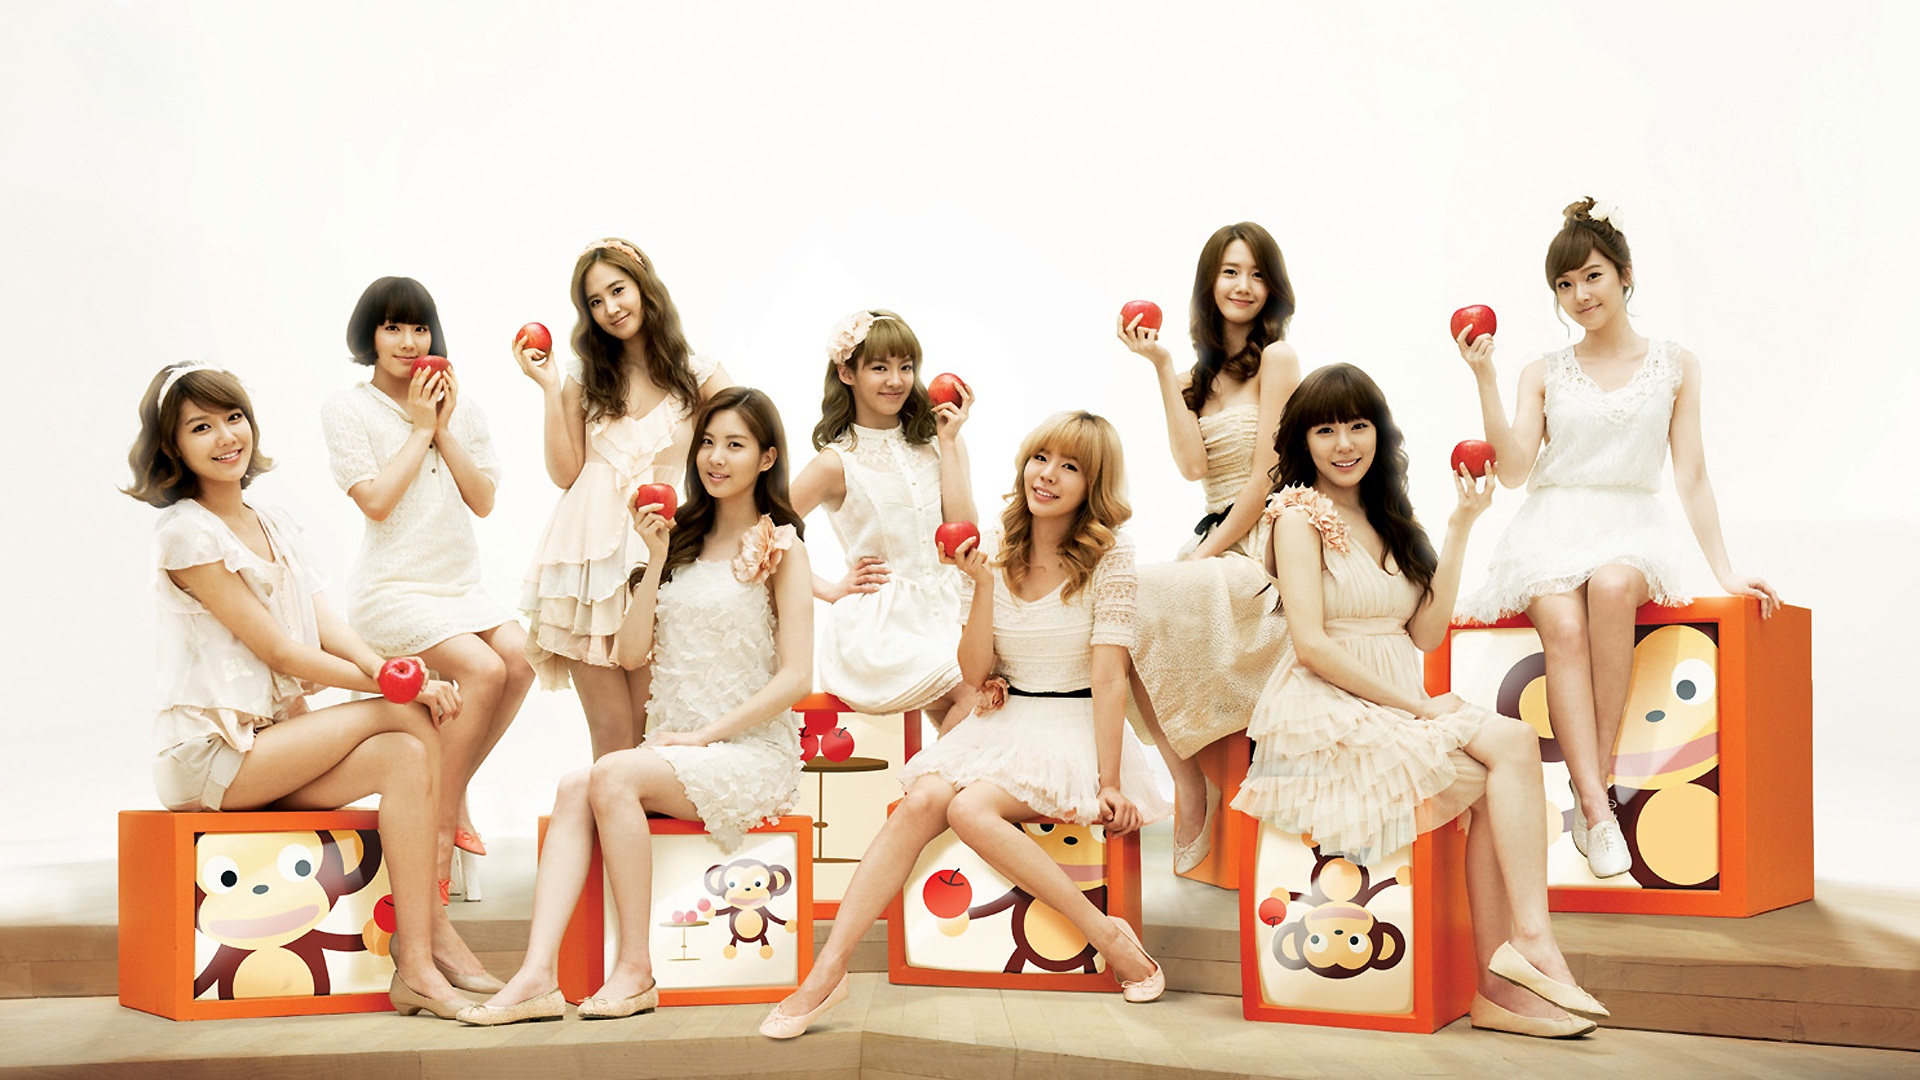 Girls Generation latest HD wallpapers collection #16 - 1920x1080